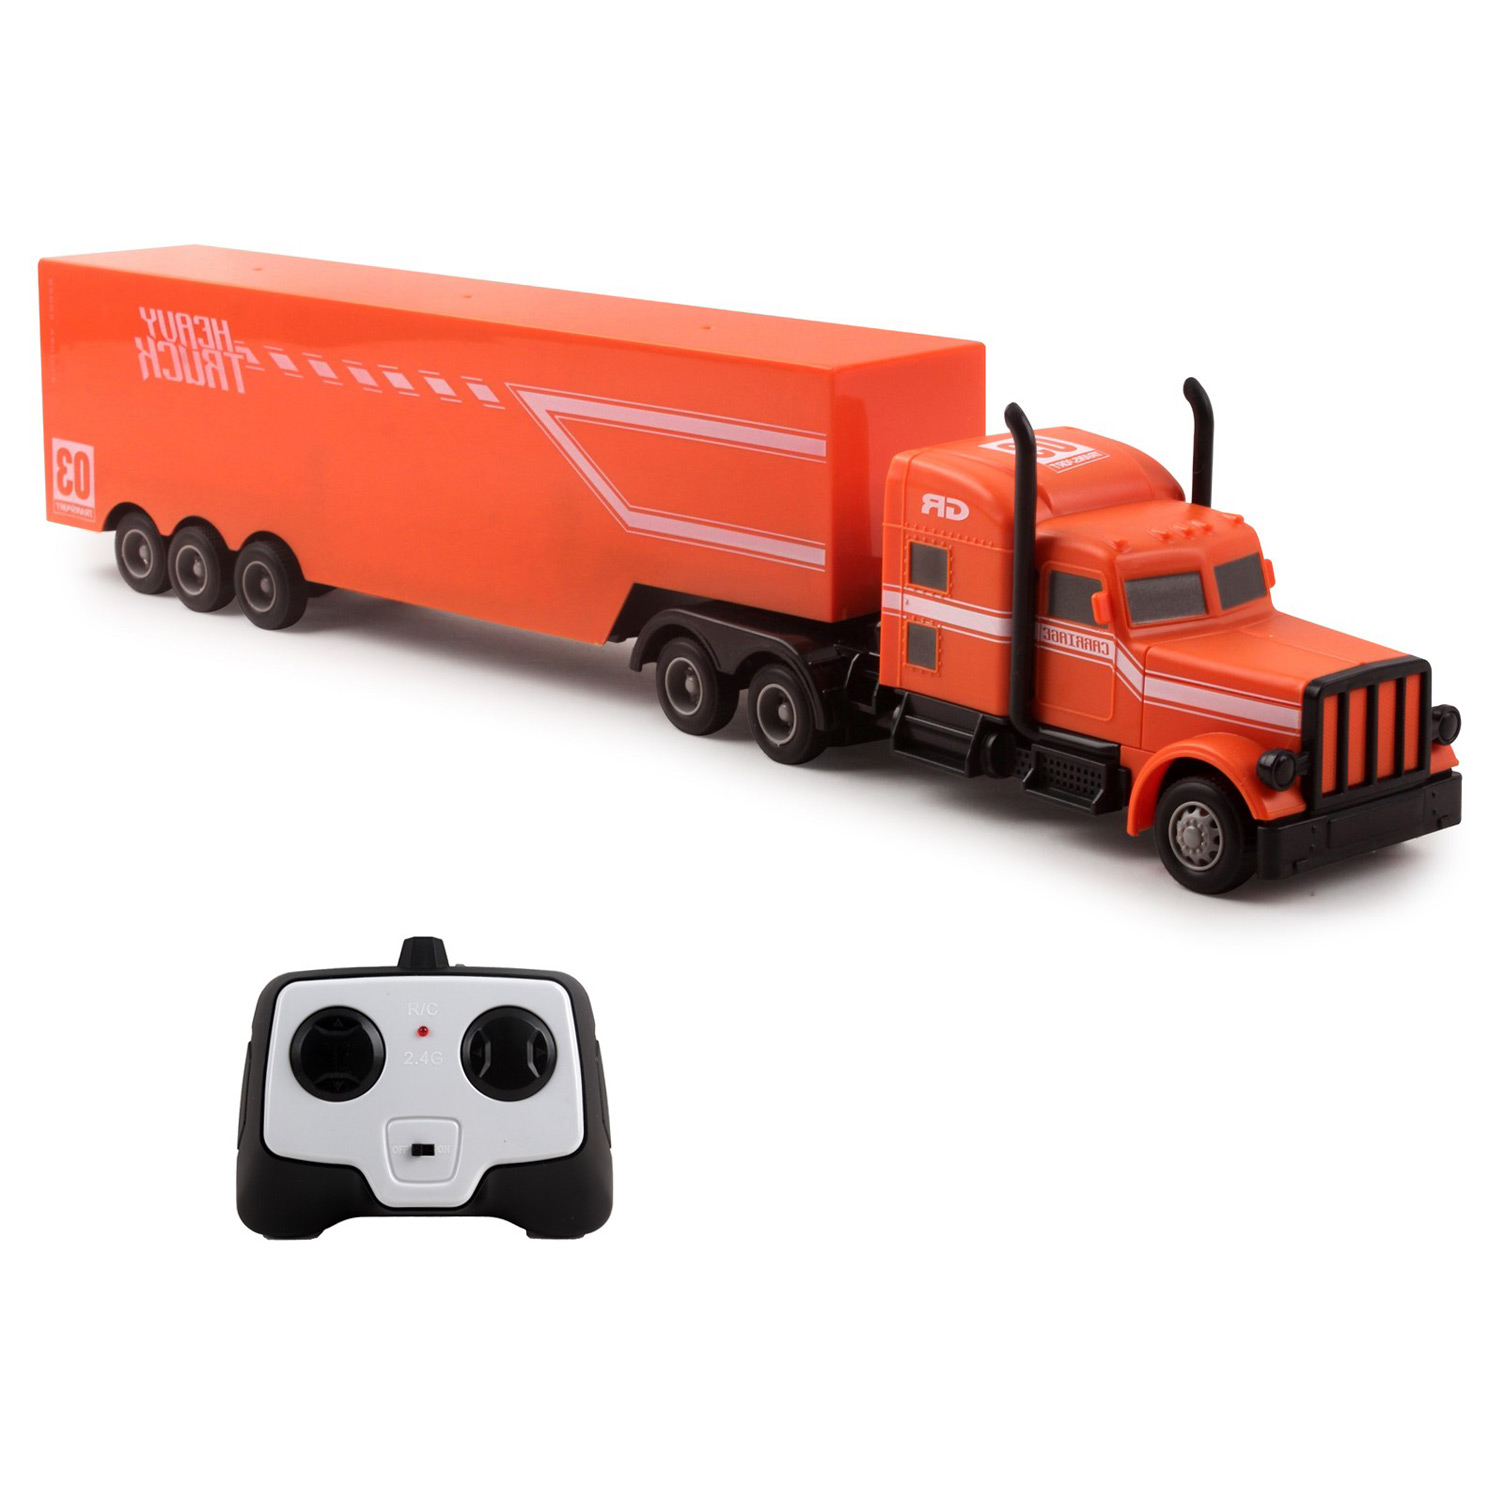 Large RC Semi Truck Trailer 18” 2.4Ghz Fast Speed 1:16 Scale Electric Hauler Rechargeable Remote Control Kids Big Rig Toy Carrier Van Transporter Vehicle Full Cargo Perfect Gift For Children